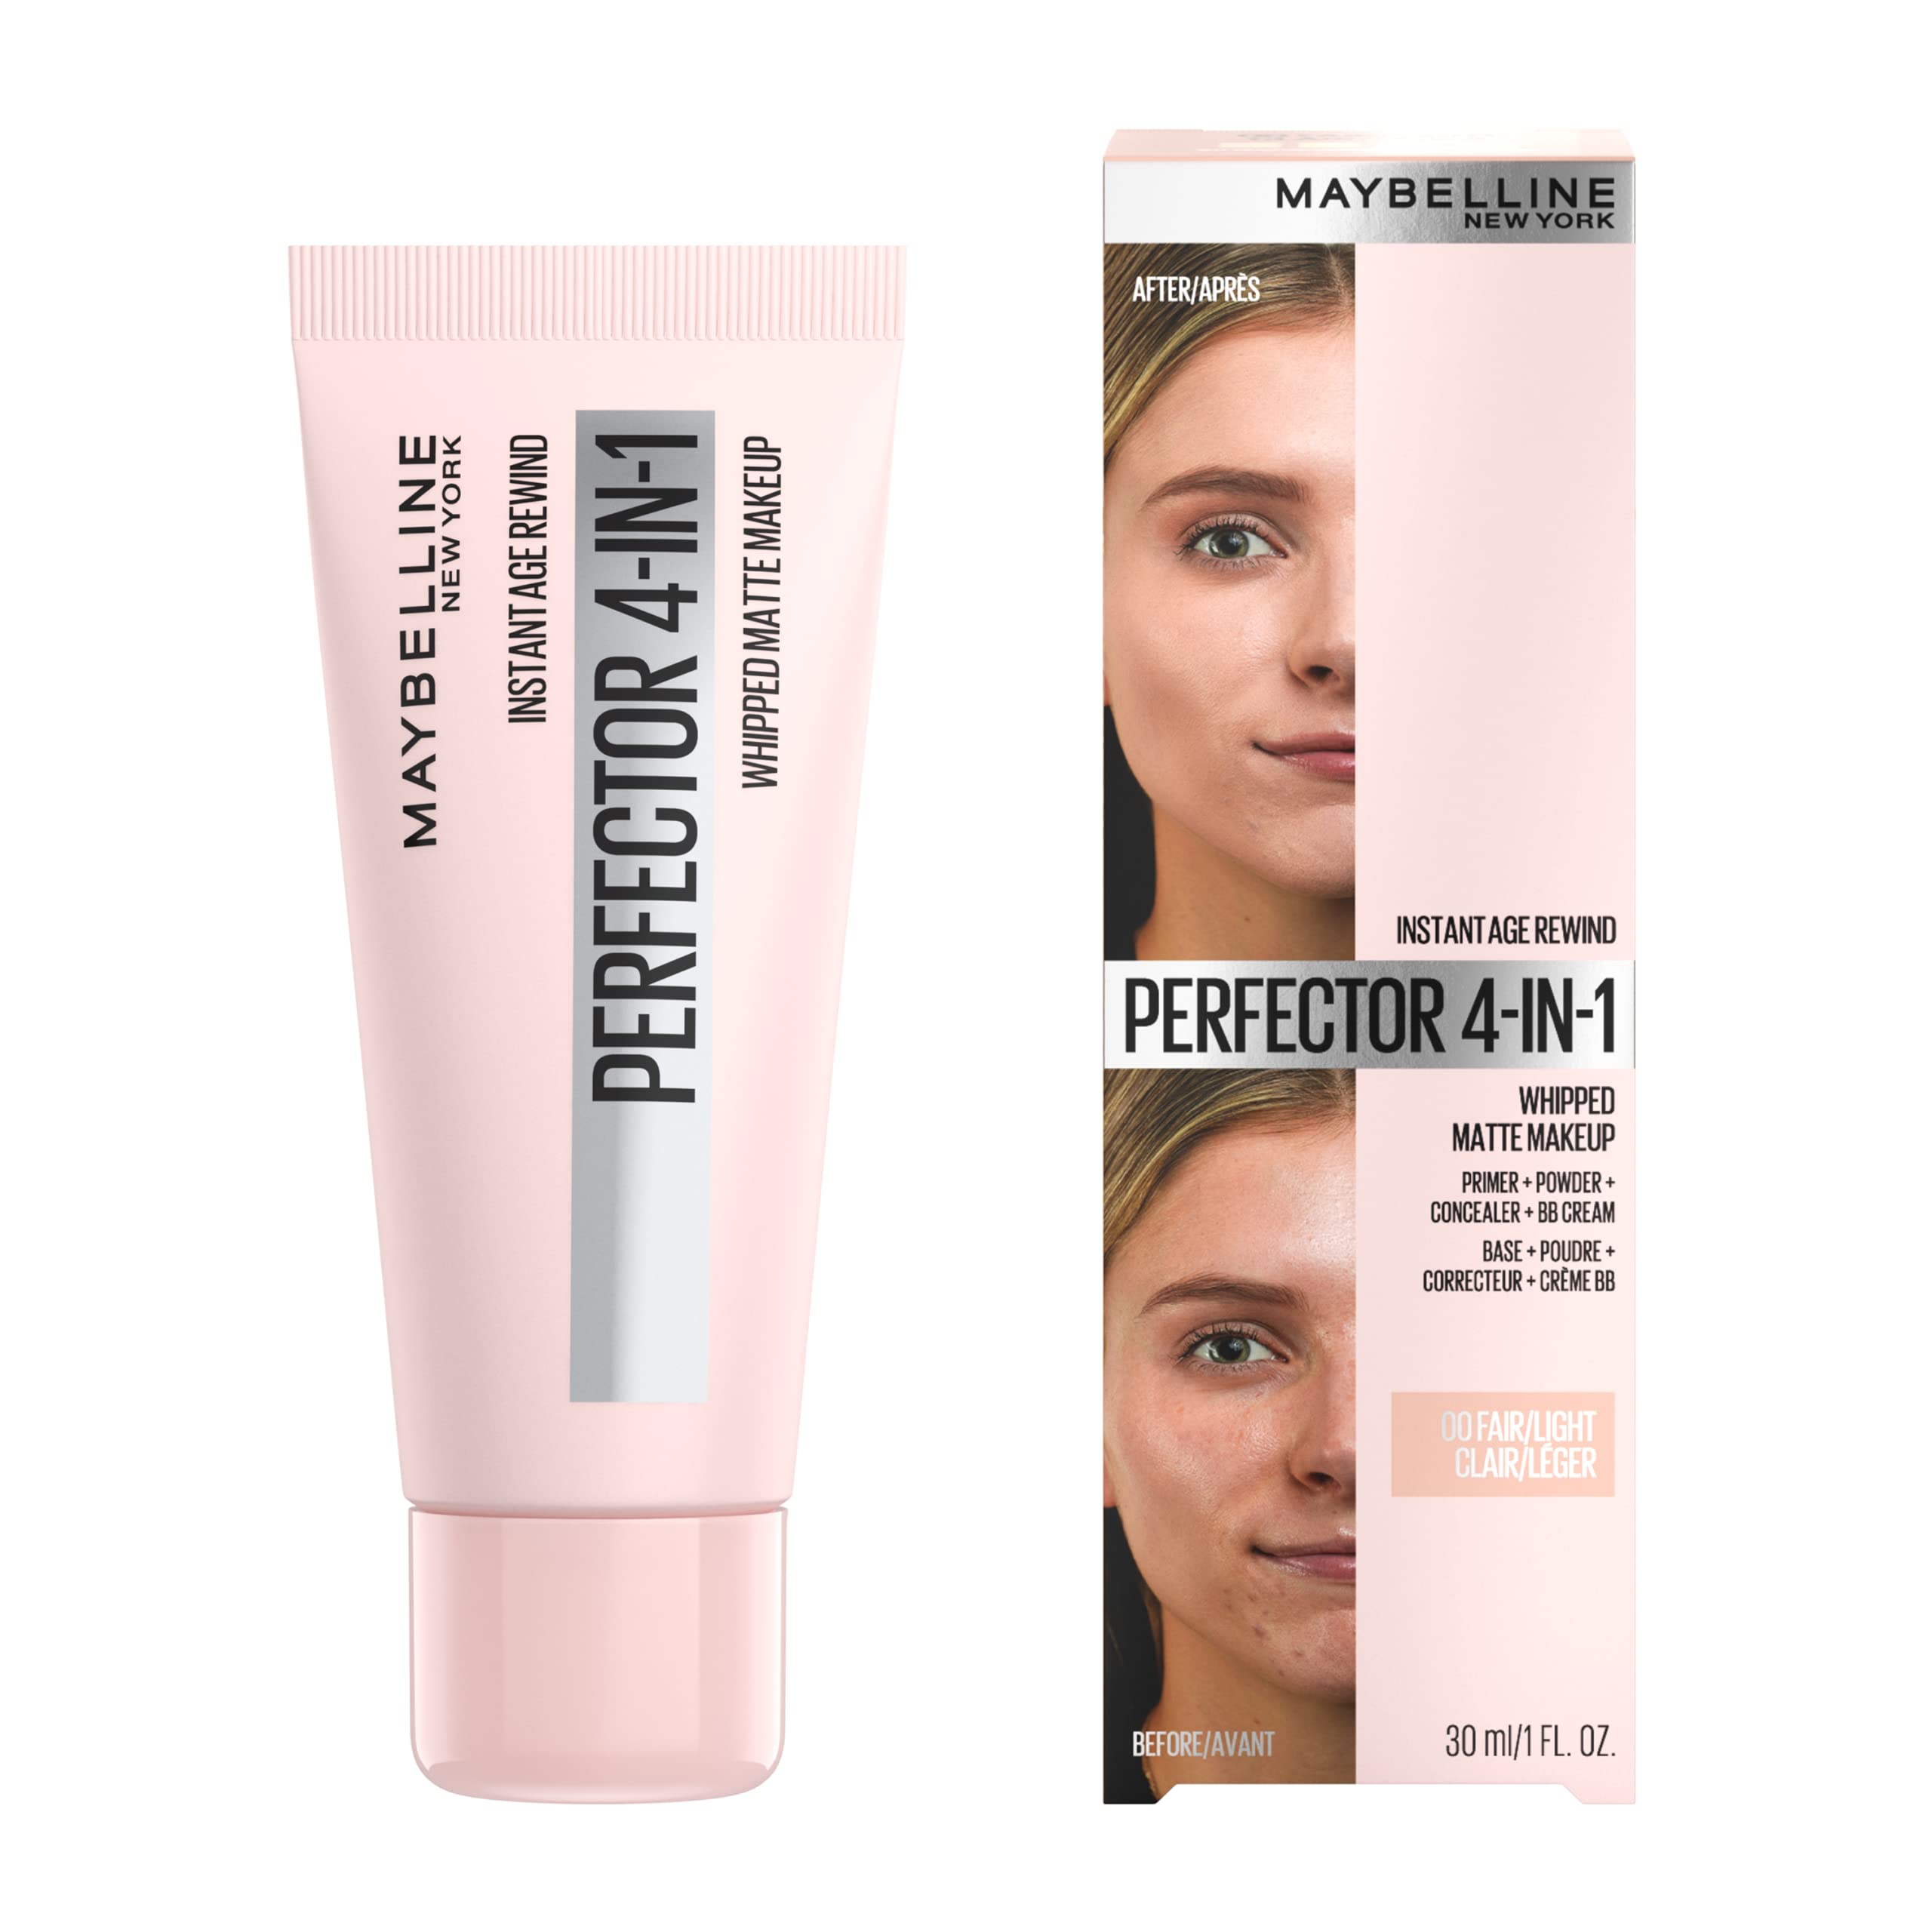 Maybelline New York Instant Age Rewind Instant Perfector 4-In-1 Matte Makeup, 00 Fair/Light, 1 Count